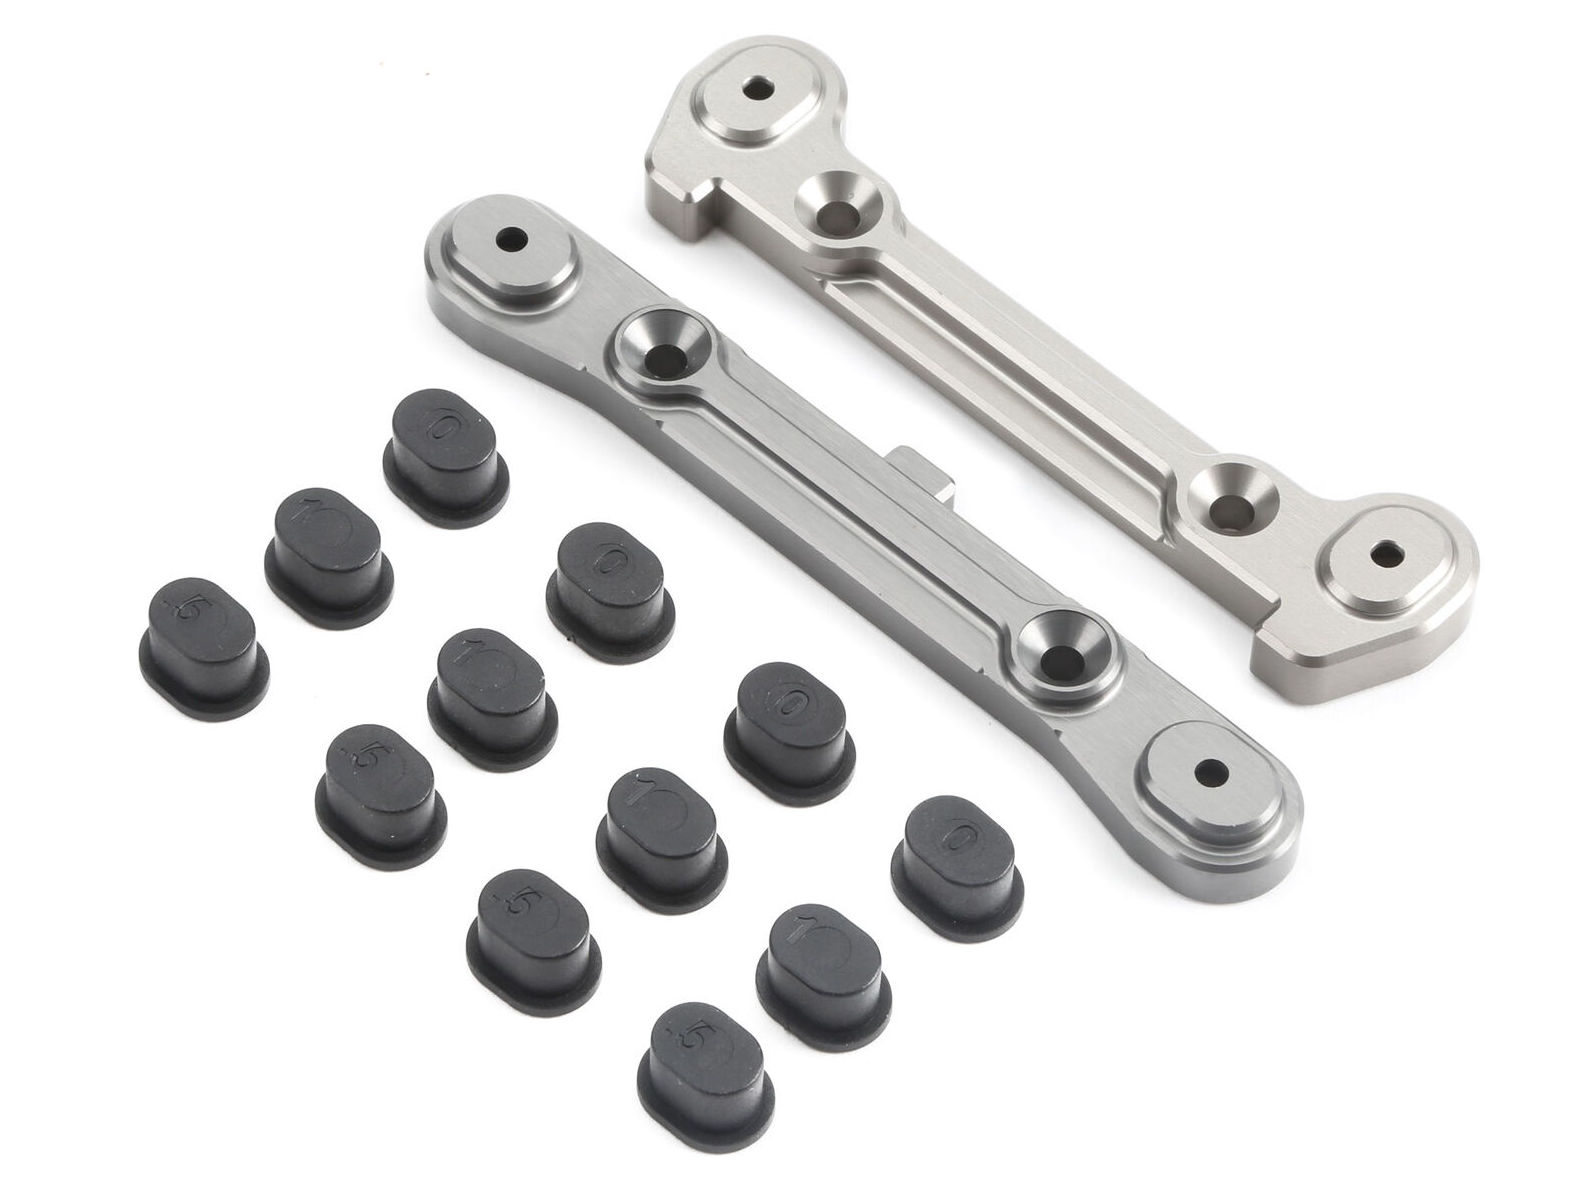 TLR 254001 - Adjustable Rear Hinge Pin Brace with Inserts (5IVE B, 5T, MINI WRC)